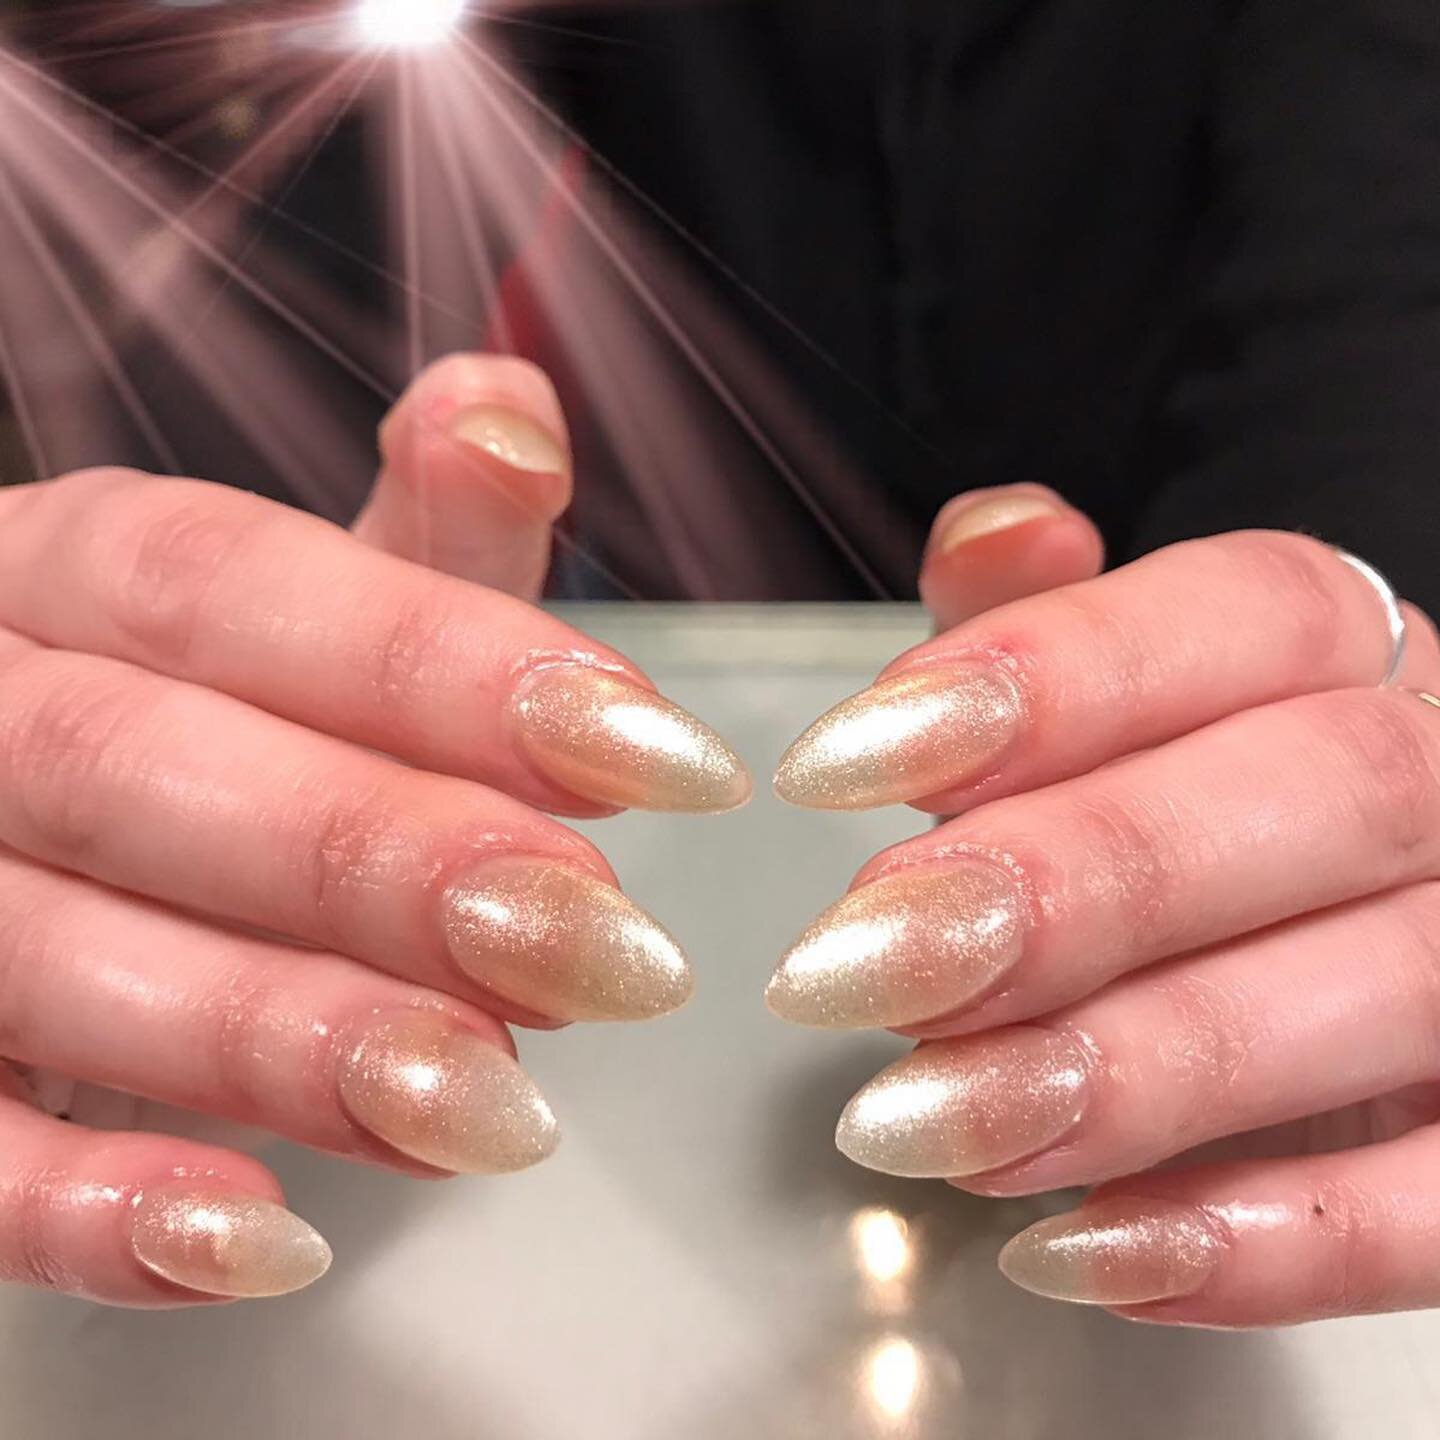 Festive nails at the ready ❄ Please call us for Christmas bookings 📞 #Glitternails #nails #nailsaddict #extensions #gold #shimmer #muswellhillnails #muswellhill #weekdaymood #pamper #christmasready #christmas #